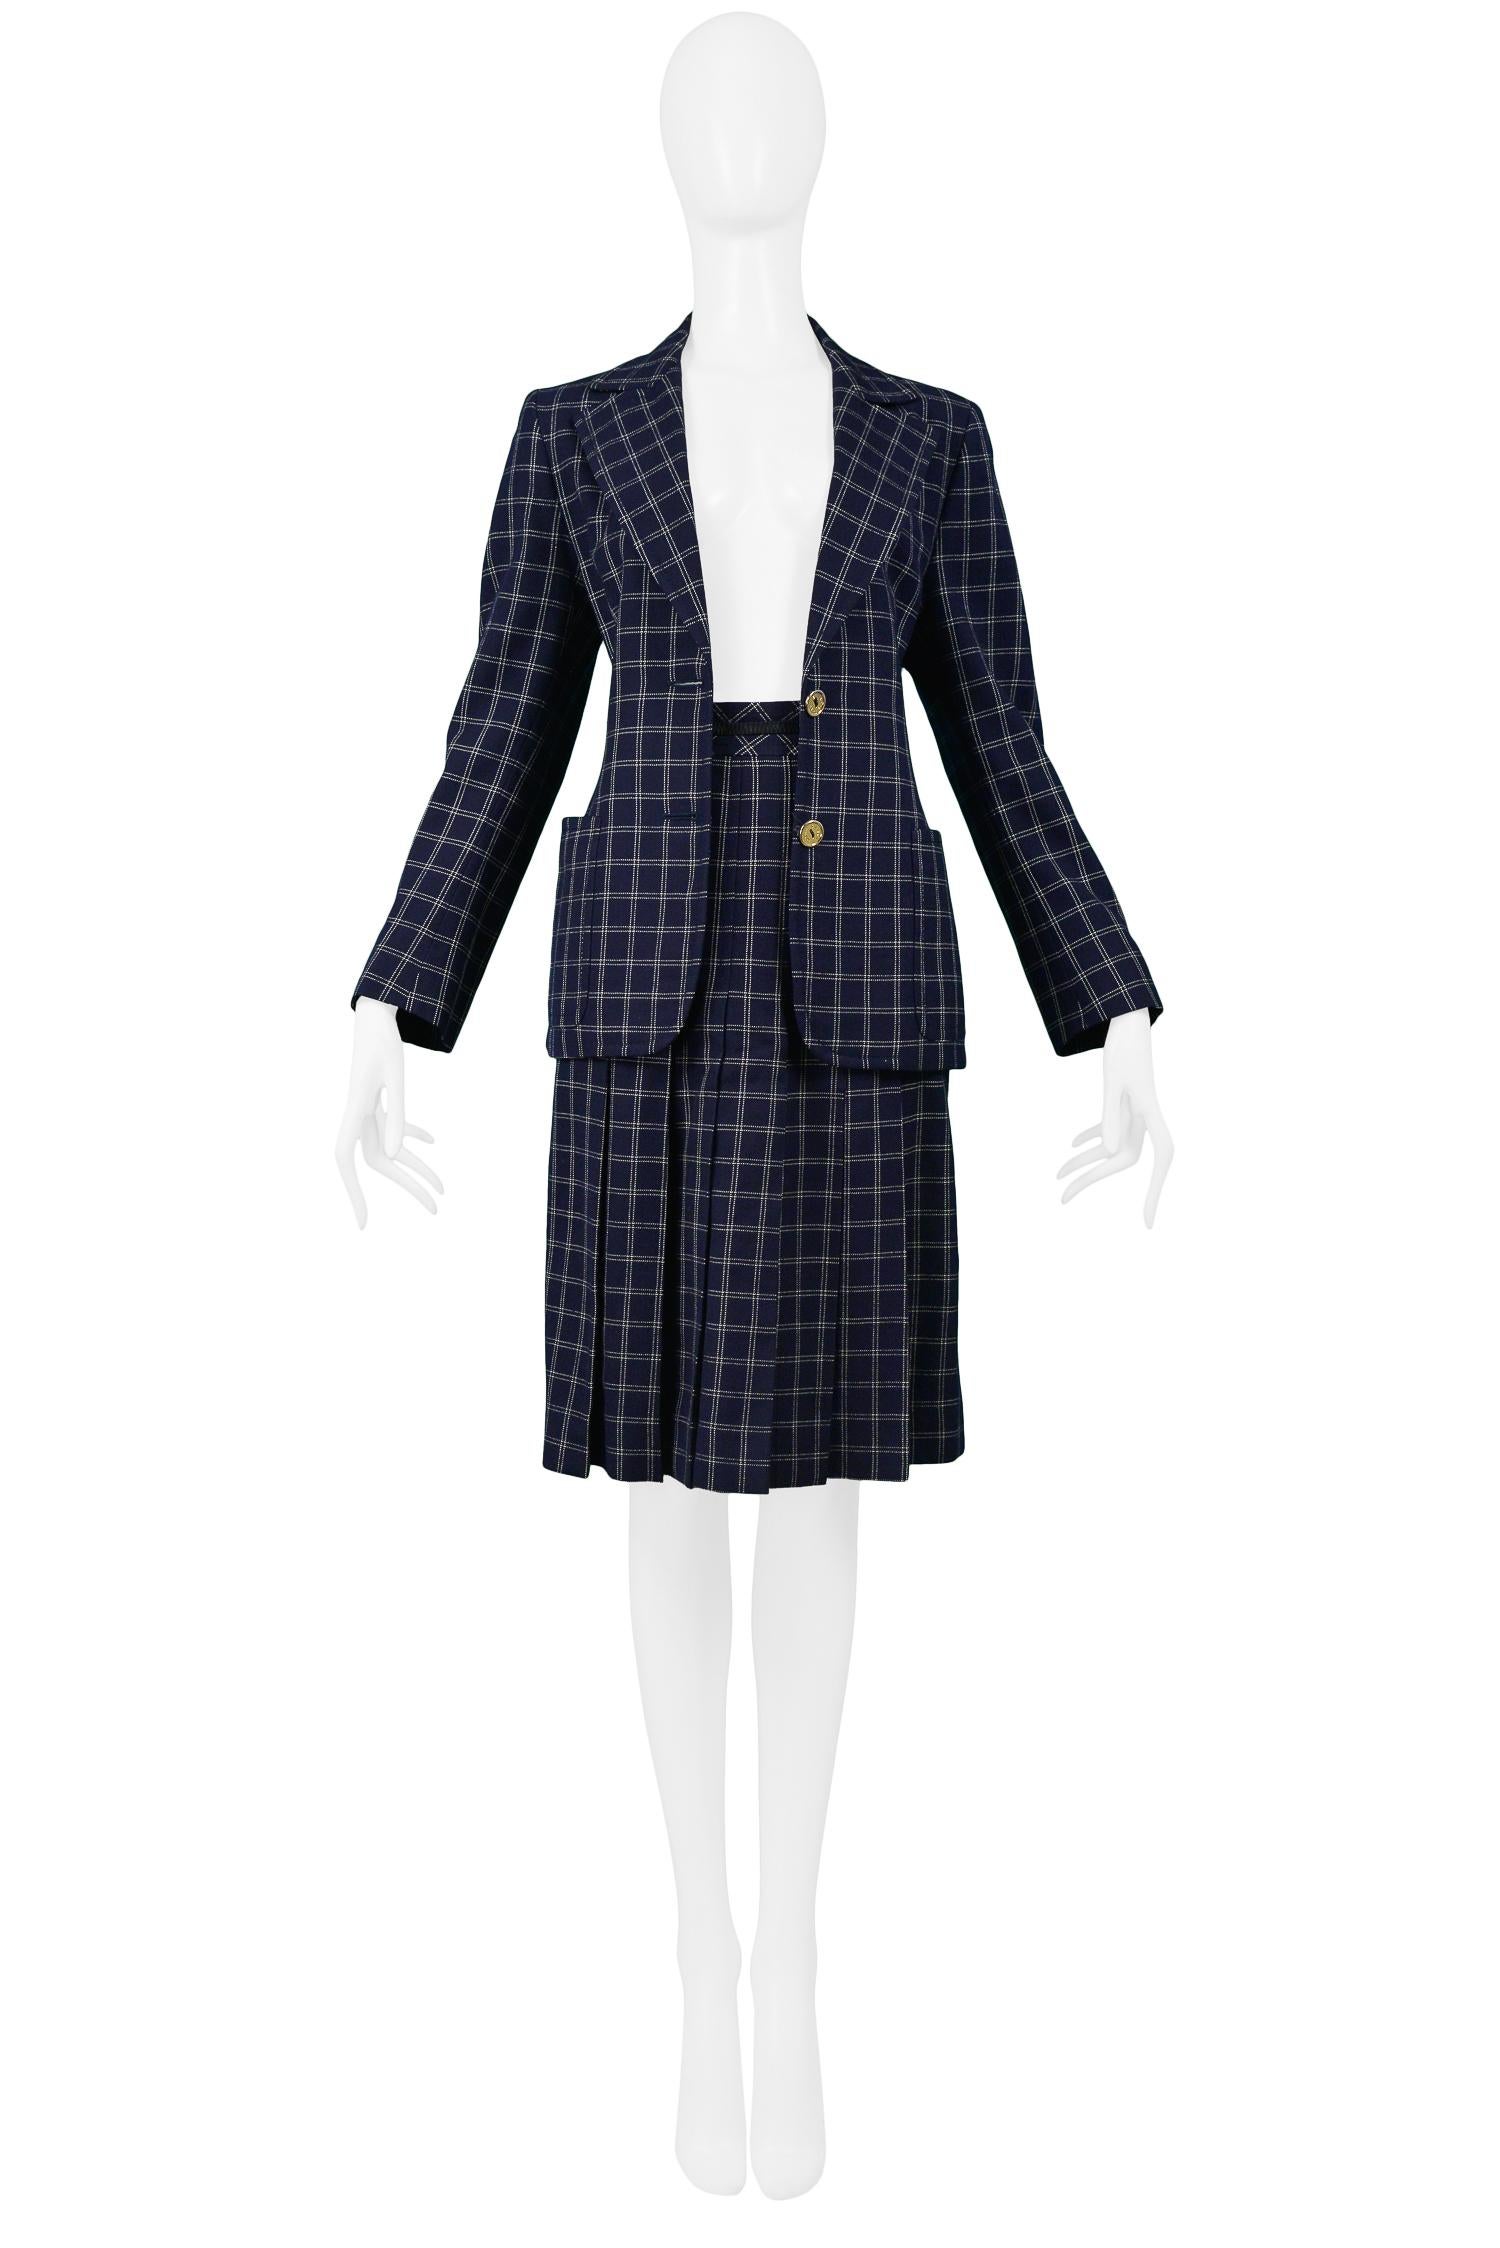 Vintage Céline wool skirt suit with navy and white windowpane plaid. The ensemble features a skirt with box pleats, gold tone and leather belted detail at waist and a jacket with a double button front closure and pockets at the side. Circa